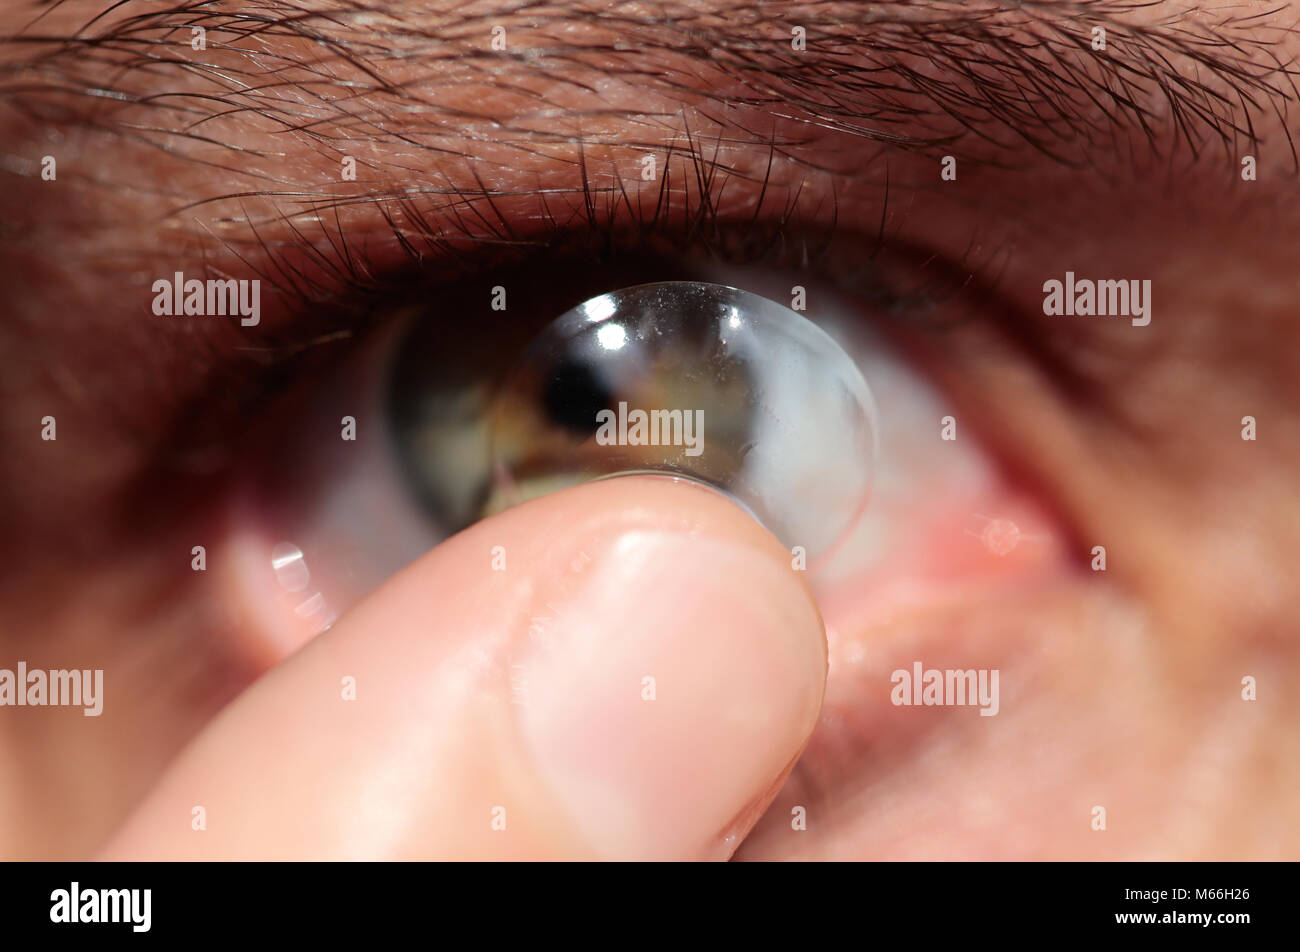 Woman putting a contact lens in her eye Stock Photo